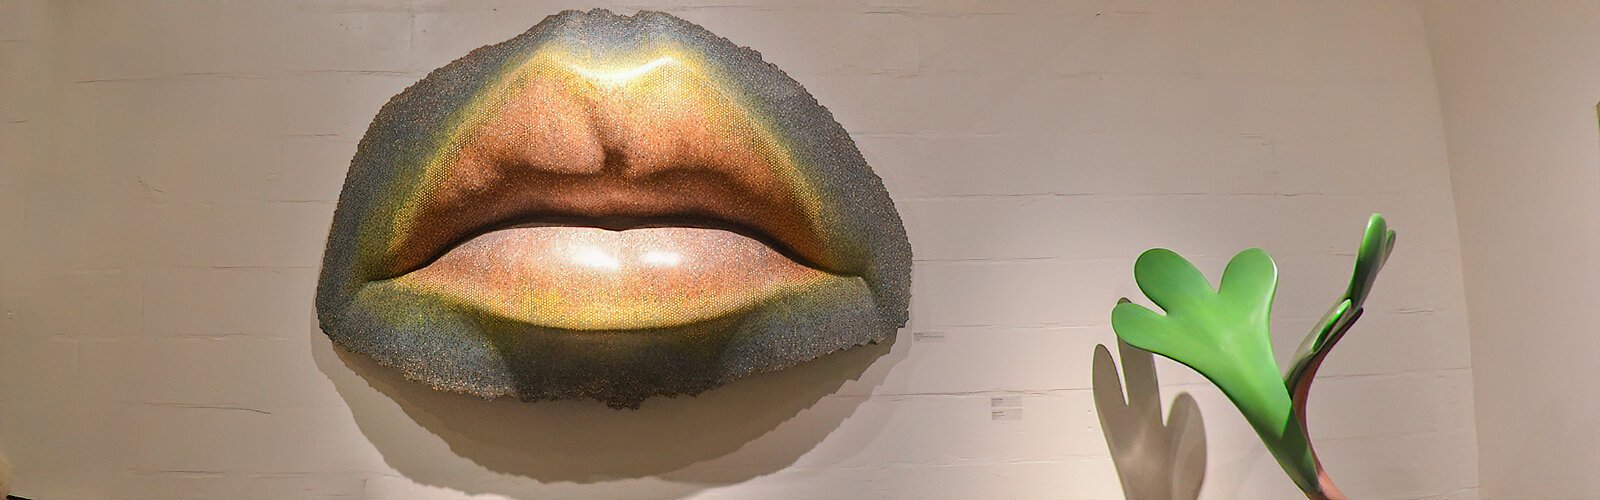 This striking lips sculpture “Chromorifice," by master sculptor Mark Aeling, is made with over 10,000 colored pencils cast with resin, fiberglass and aluminum to give a pixelated look.